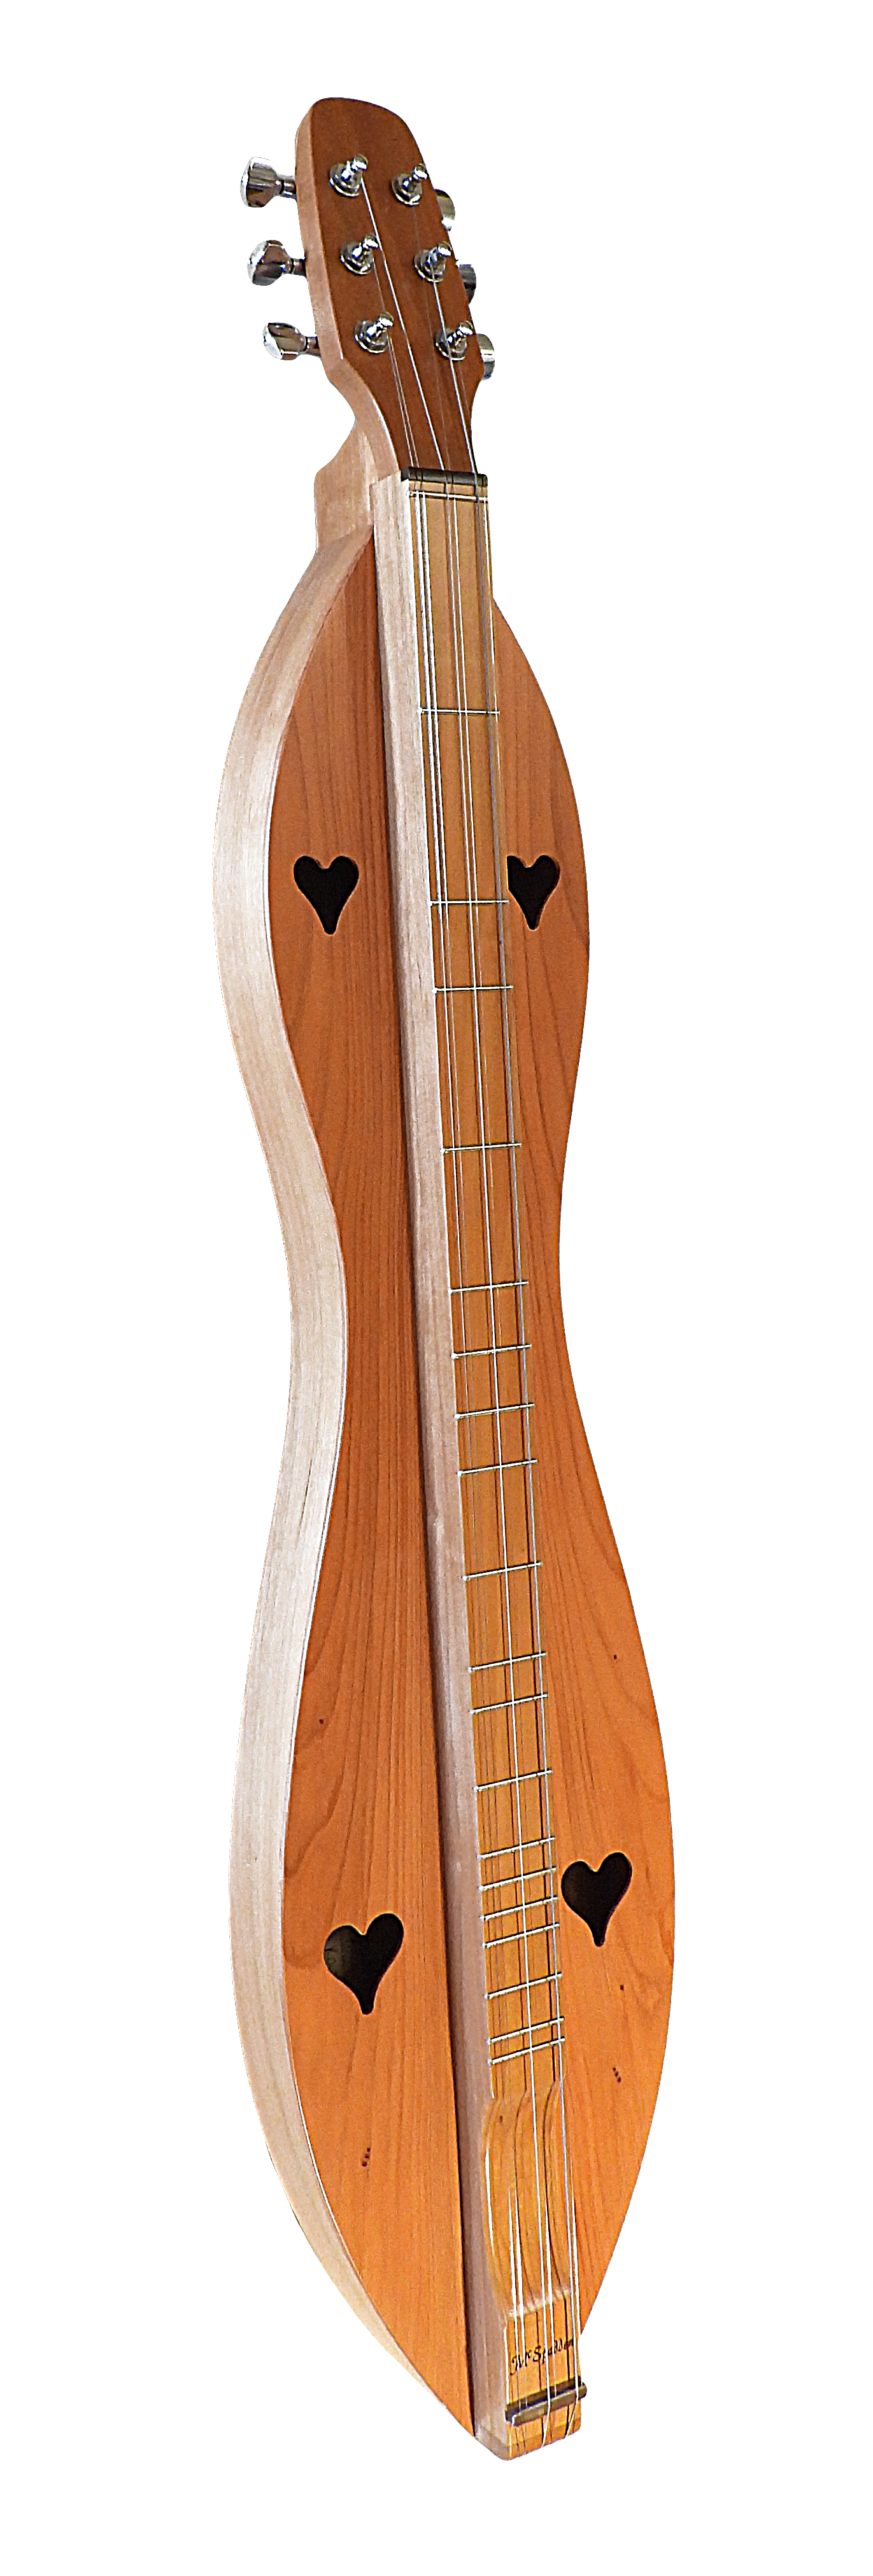 A 6 String Baritone, Flathead, Hourglass with Cherry back and sides, Redwood top (6FHCRB) with a bird on it.